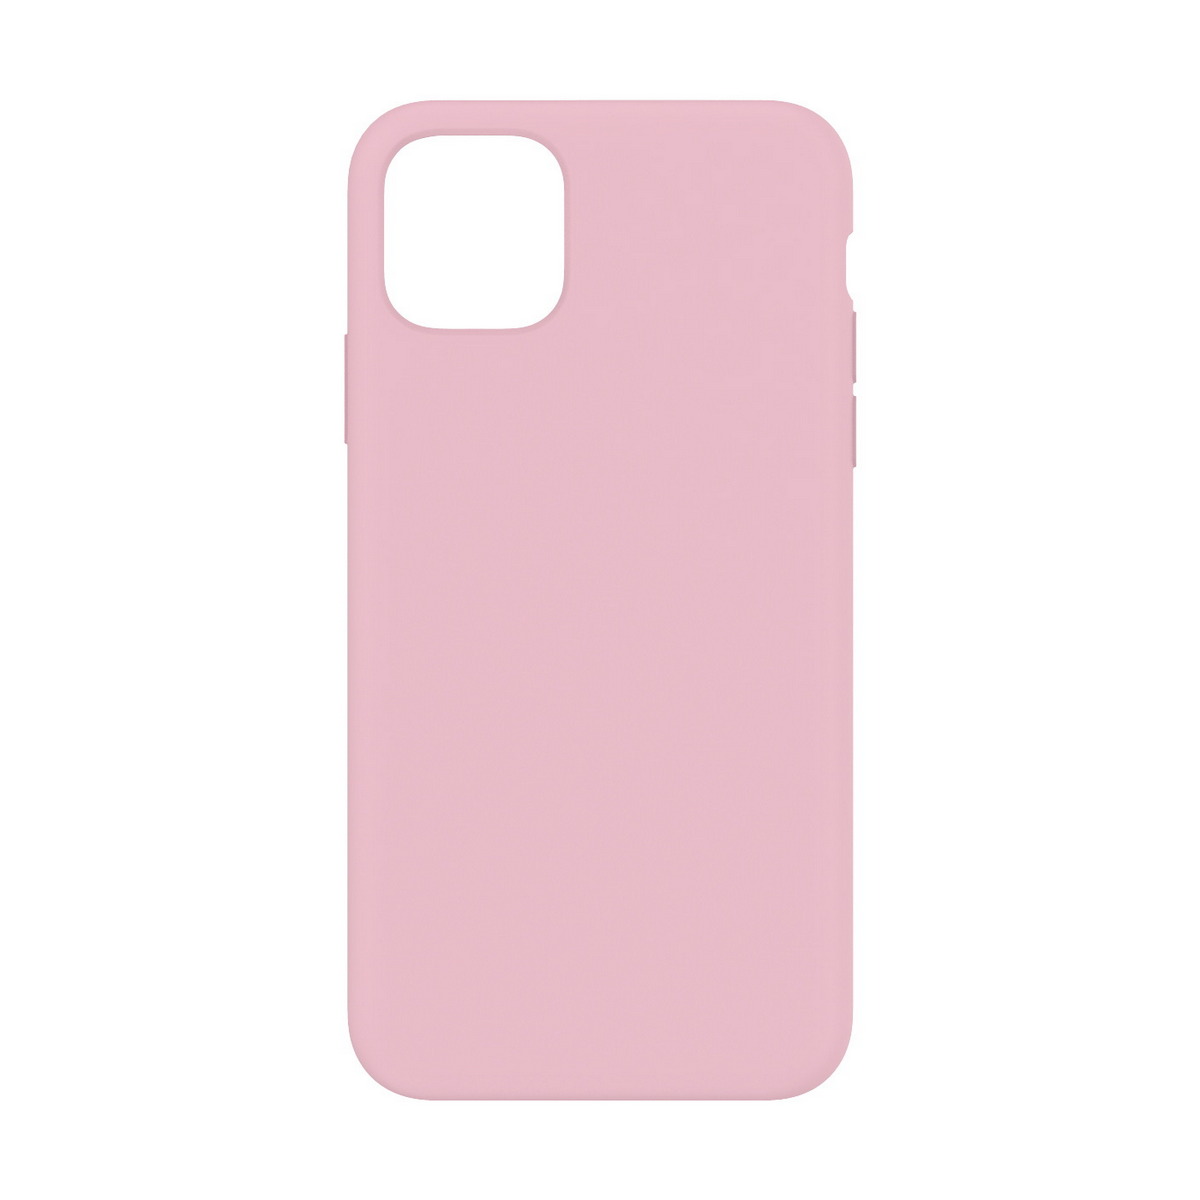 HEAL Case for iPhone 11 Pro (Pink) Case Silicone